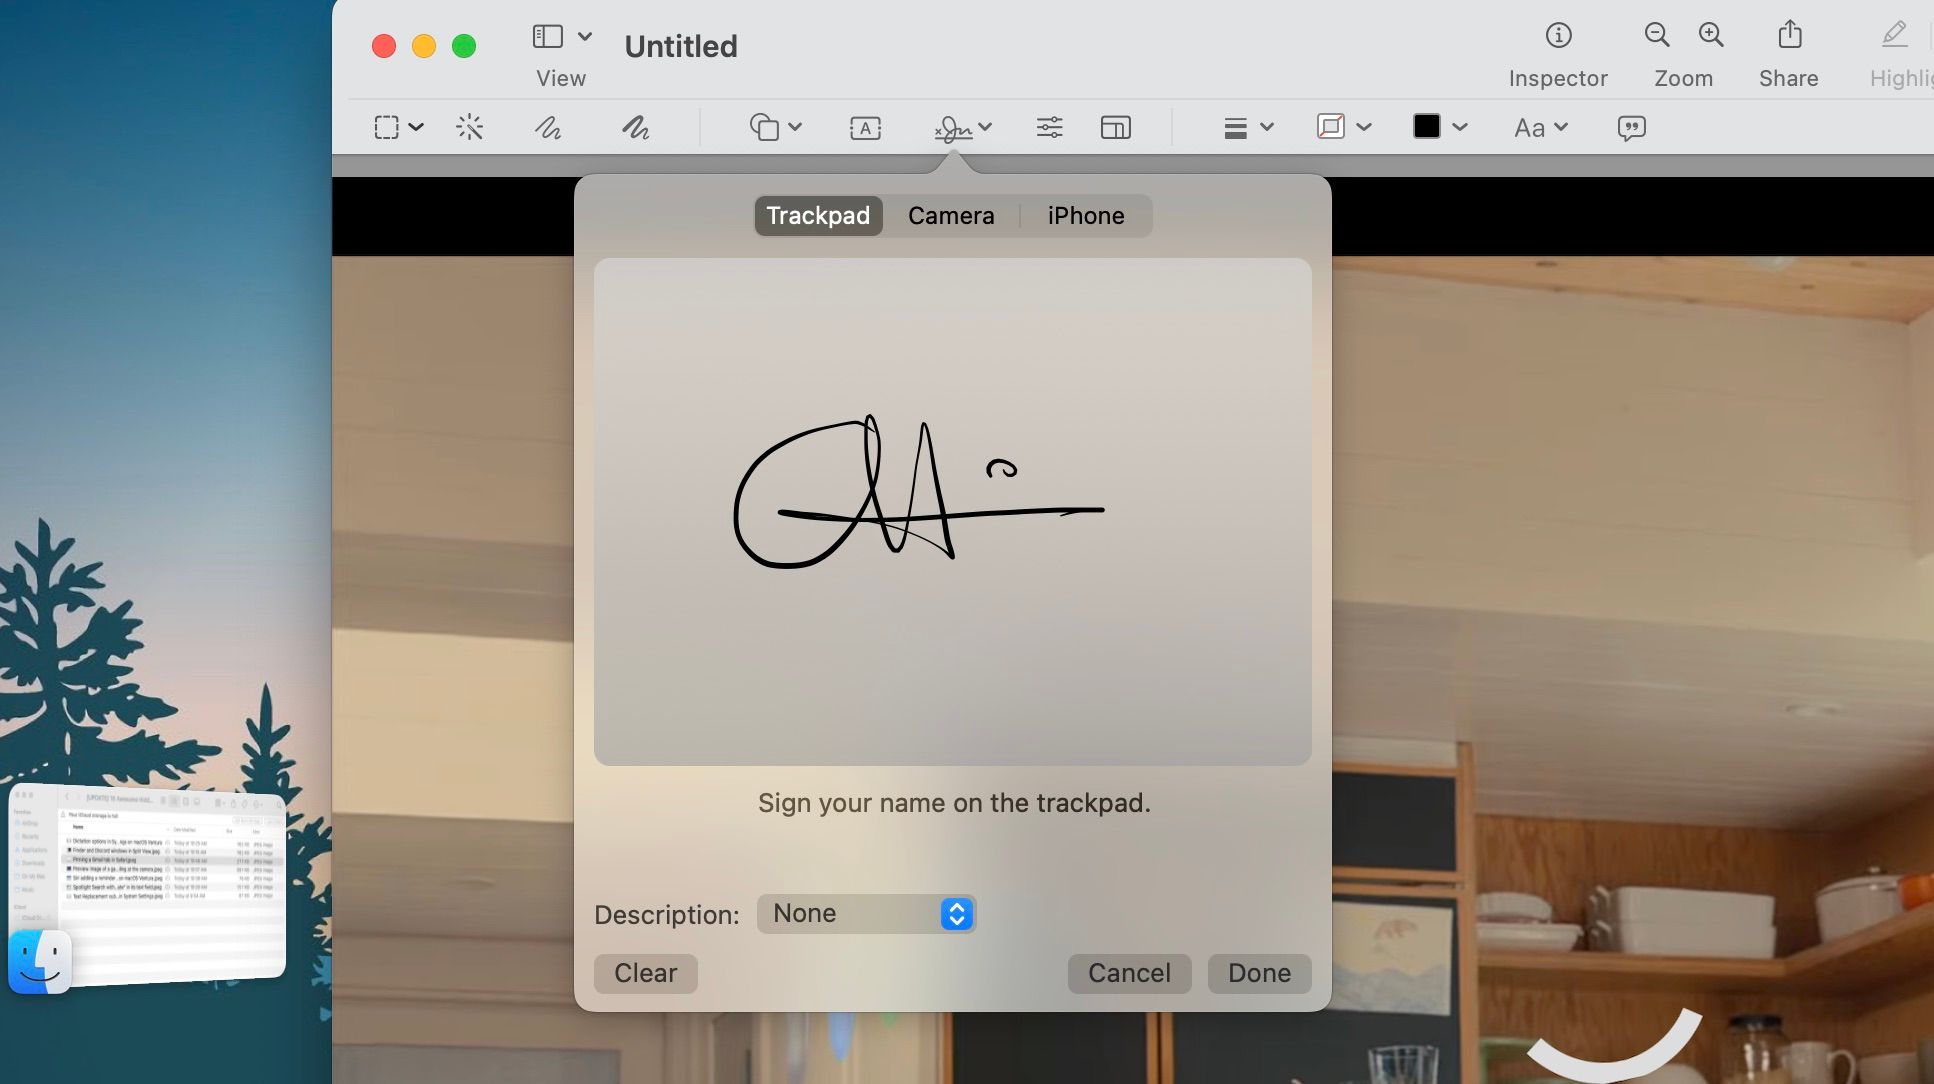 Signature signed with the trackpad in Preview